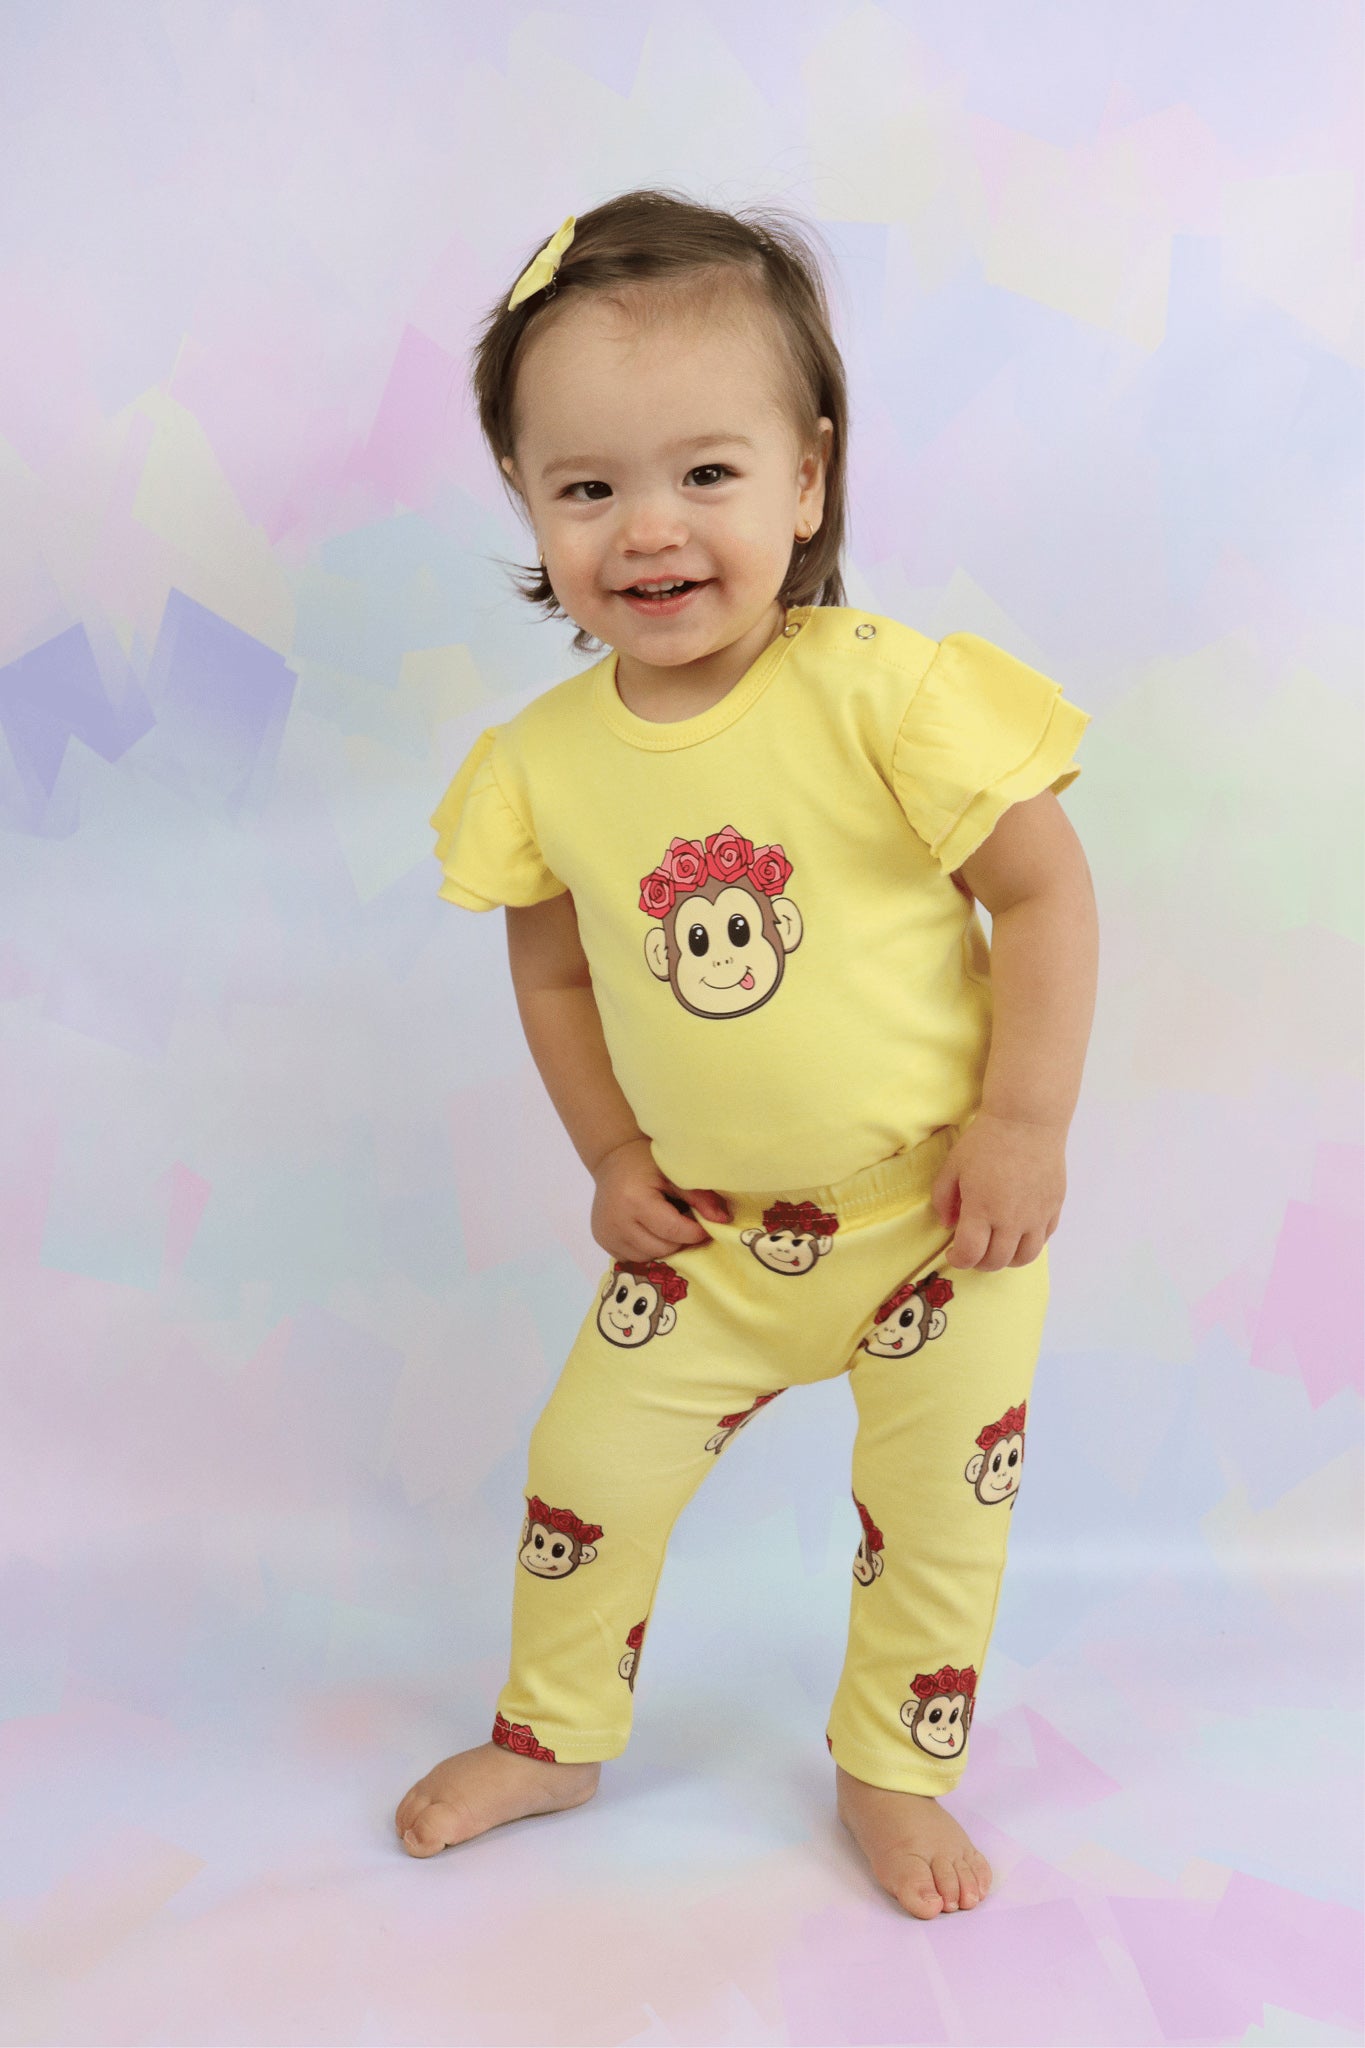 toddler girl wearing a pastel yellow frill romper with a cute monkey face printed on it. Also wearing matching yellow leggings with cute monkey faced printed all over